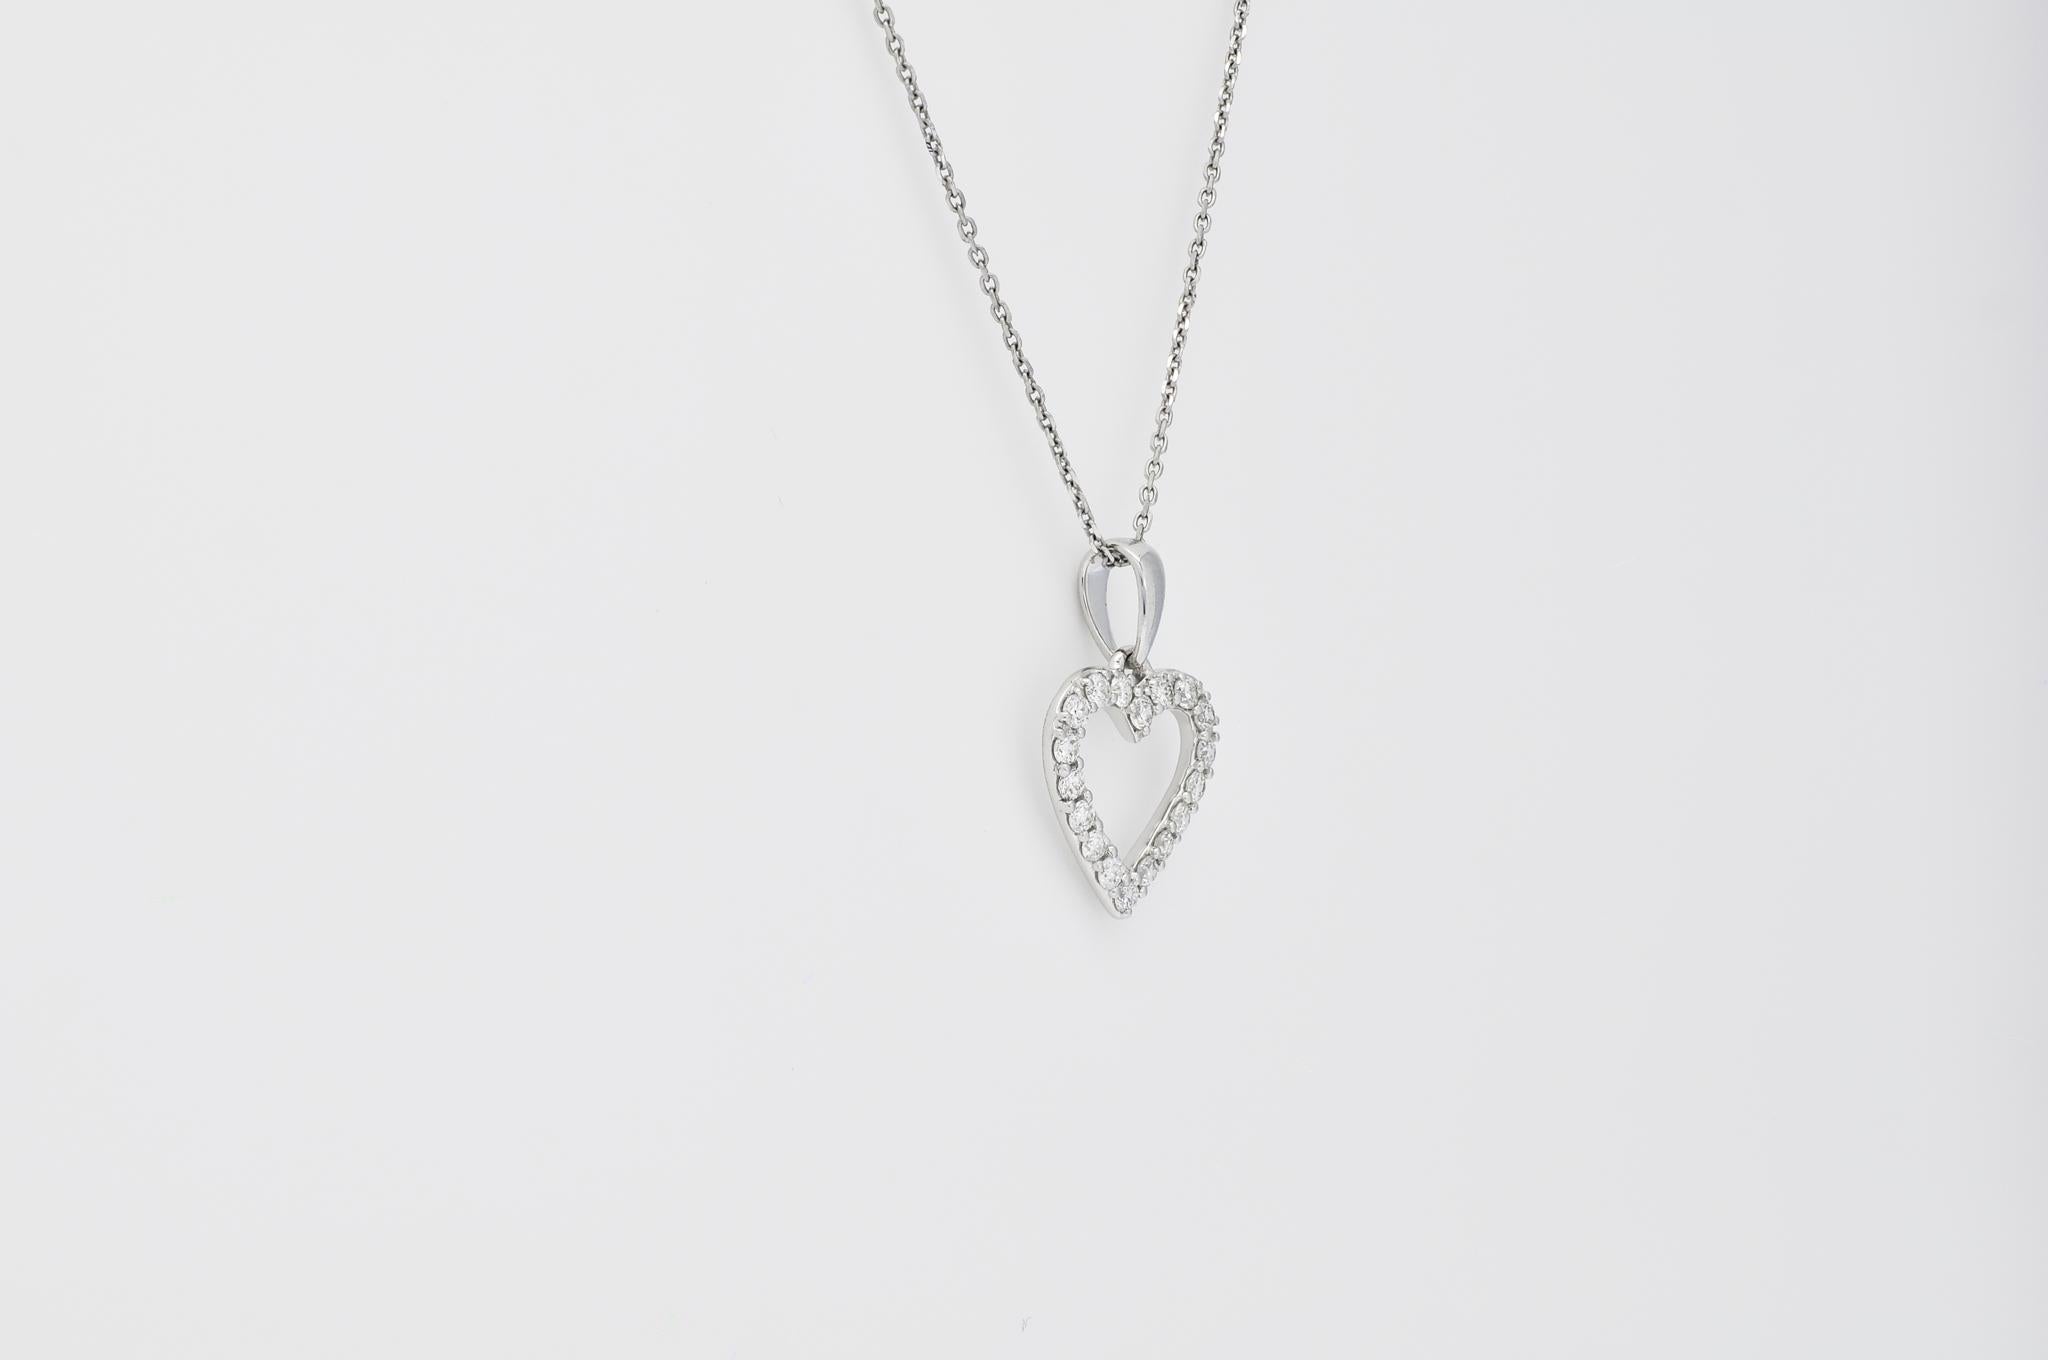 Introducing our exquisite Large Heart Shaped Pendant Necklace, a symbol of love and devotion delicately crafted to captivate hearts. This stunning necklace features a dainty heart-shaped pendant, meticulously formed from shimmering 18K White gold,